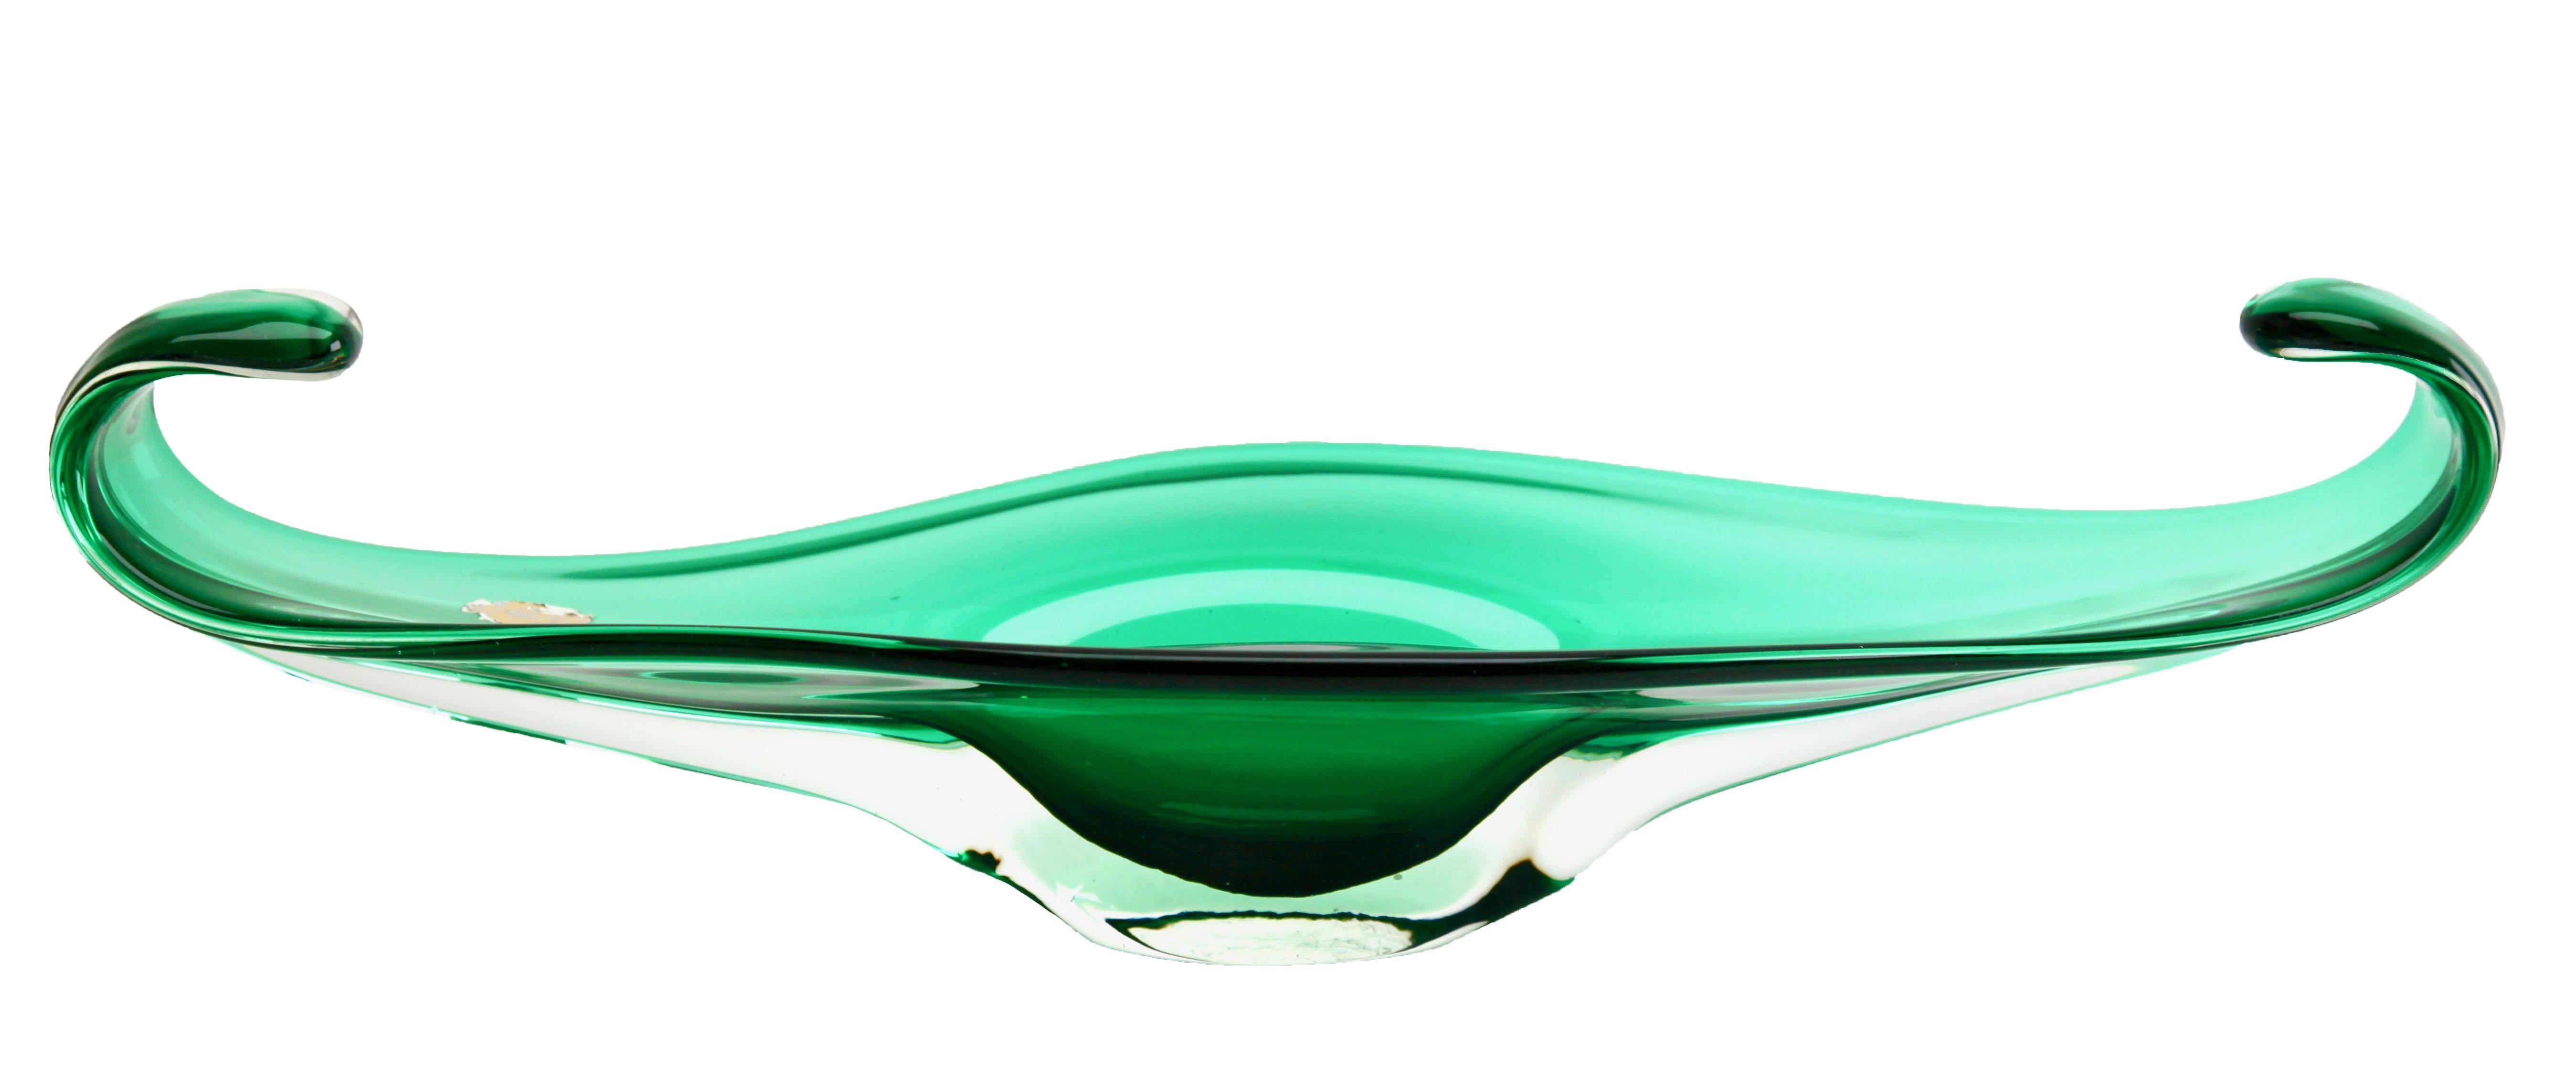 Very large centrepiece / fruit bowl by Fratelli Toso.
Emerald green core with thick somerso and two curved handles made in the first period of this range, with early label.
The masters of Murano were among the first to make items in this style,